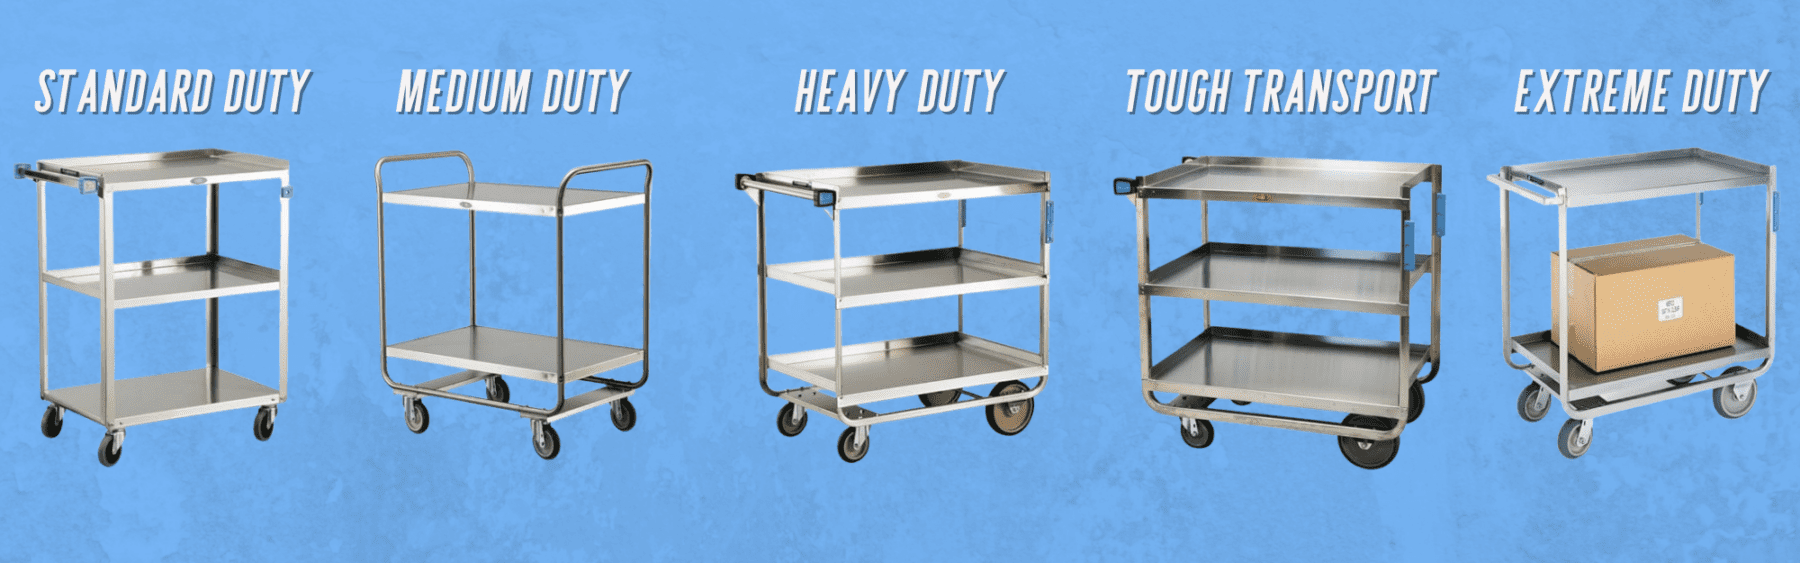 five tiers of utility carts: standard, medium, heavy, transport, and extreme duty